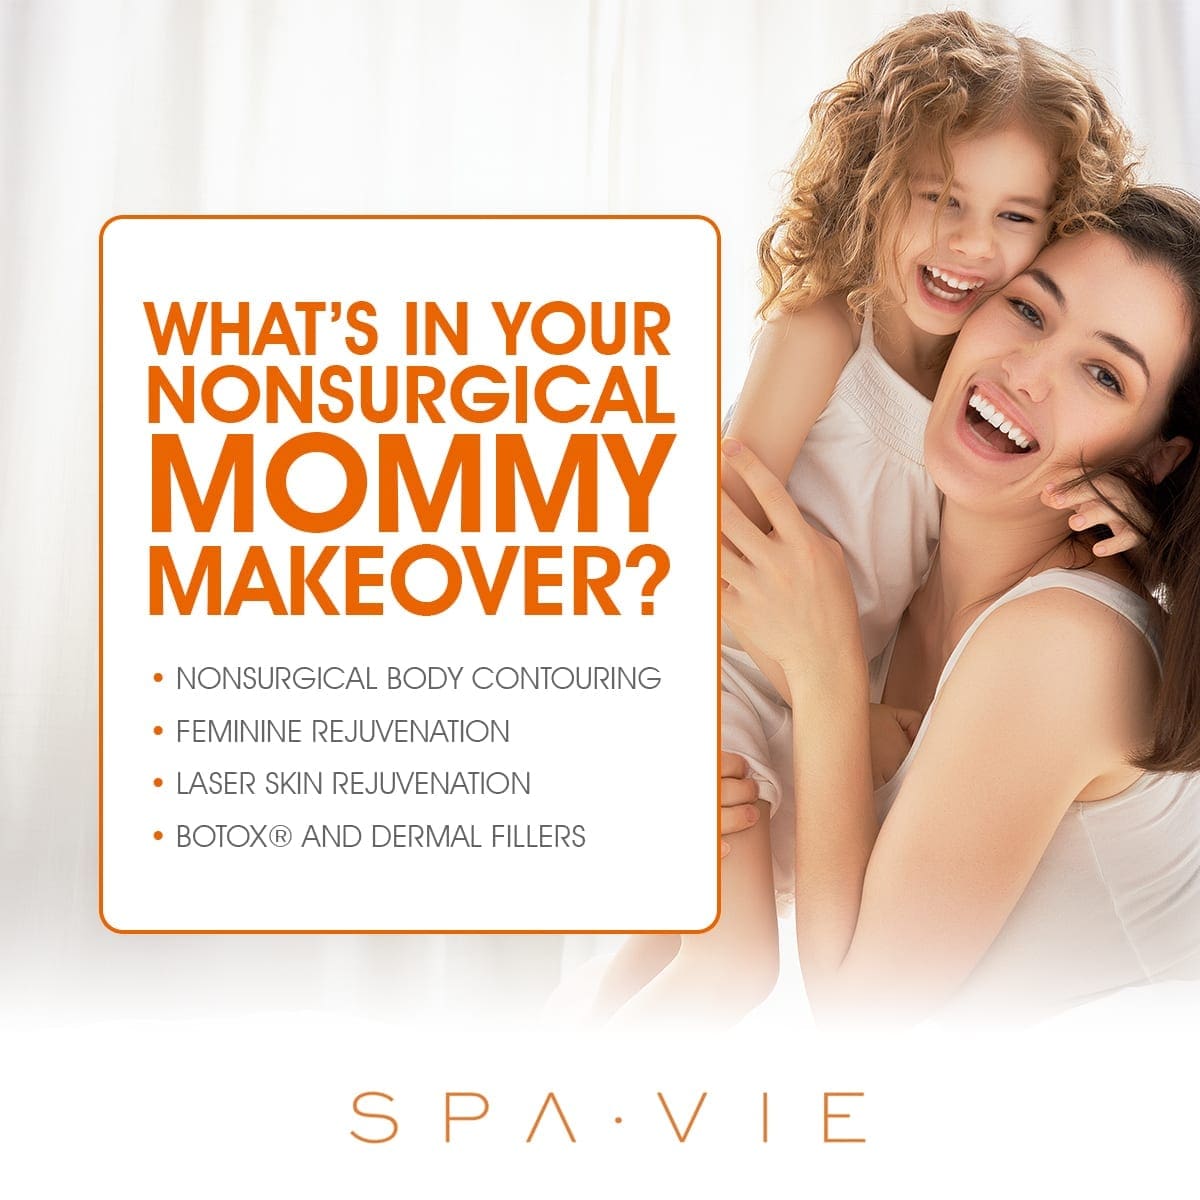 What's In Your Nonsurgical Mommy Makeover? [Infographic]